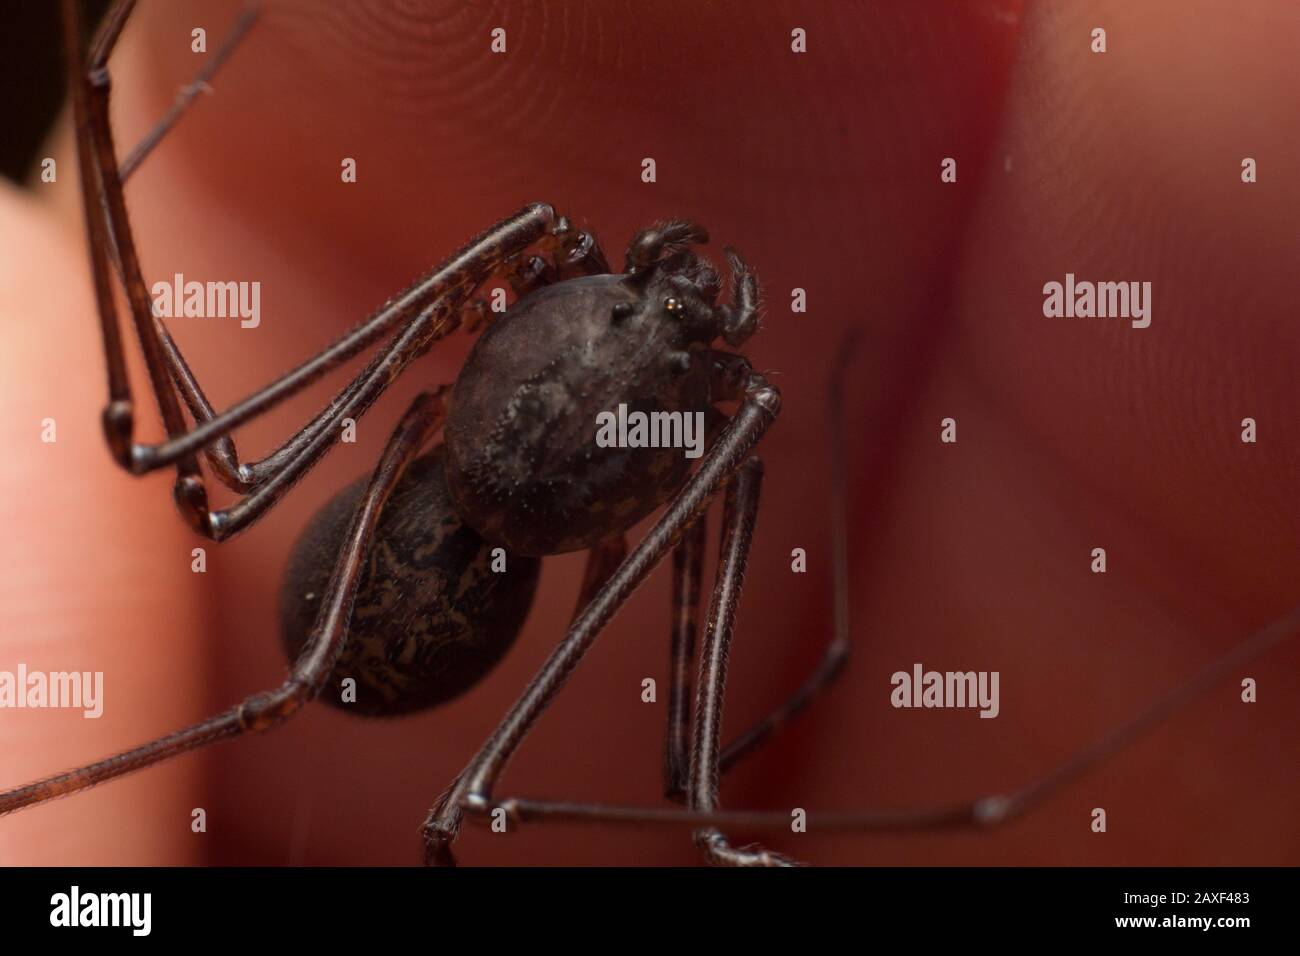 Small house spider known as spitting spider, Scytodes, close-up of the spider on hand Stock Photo